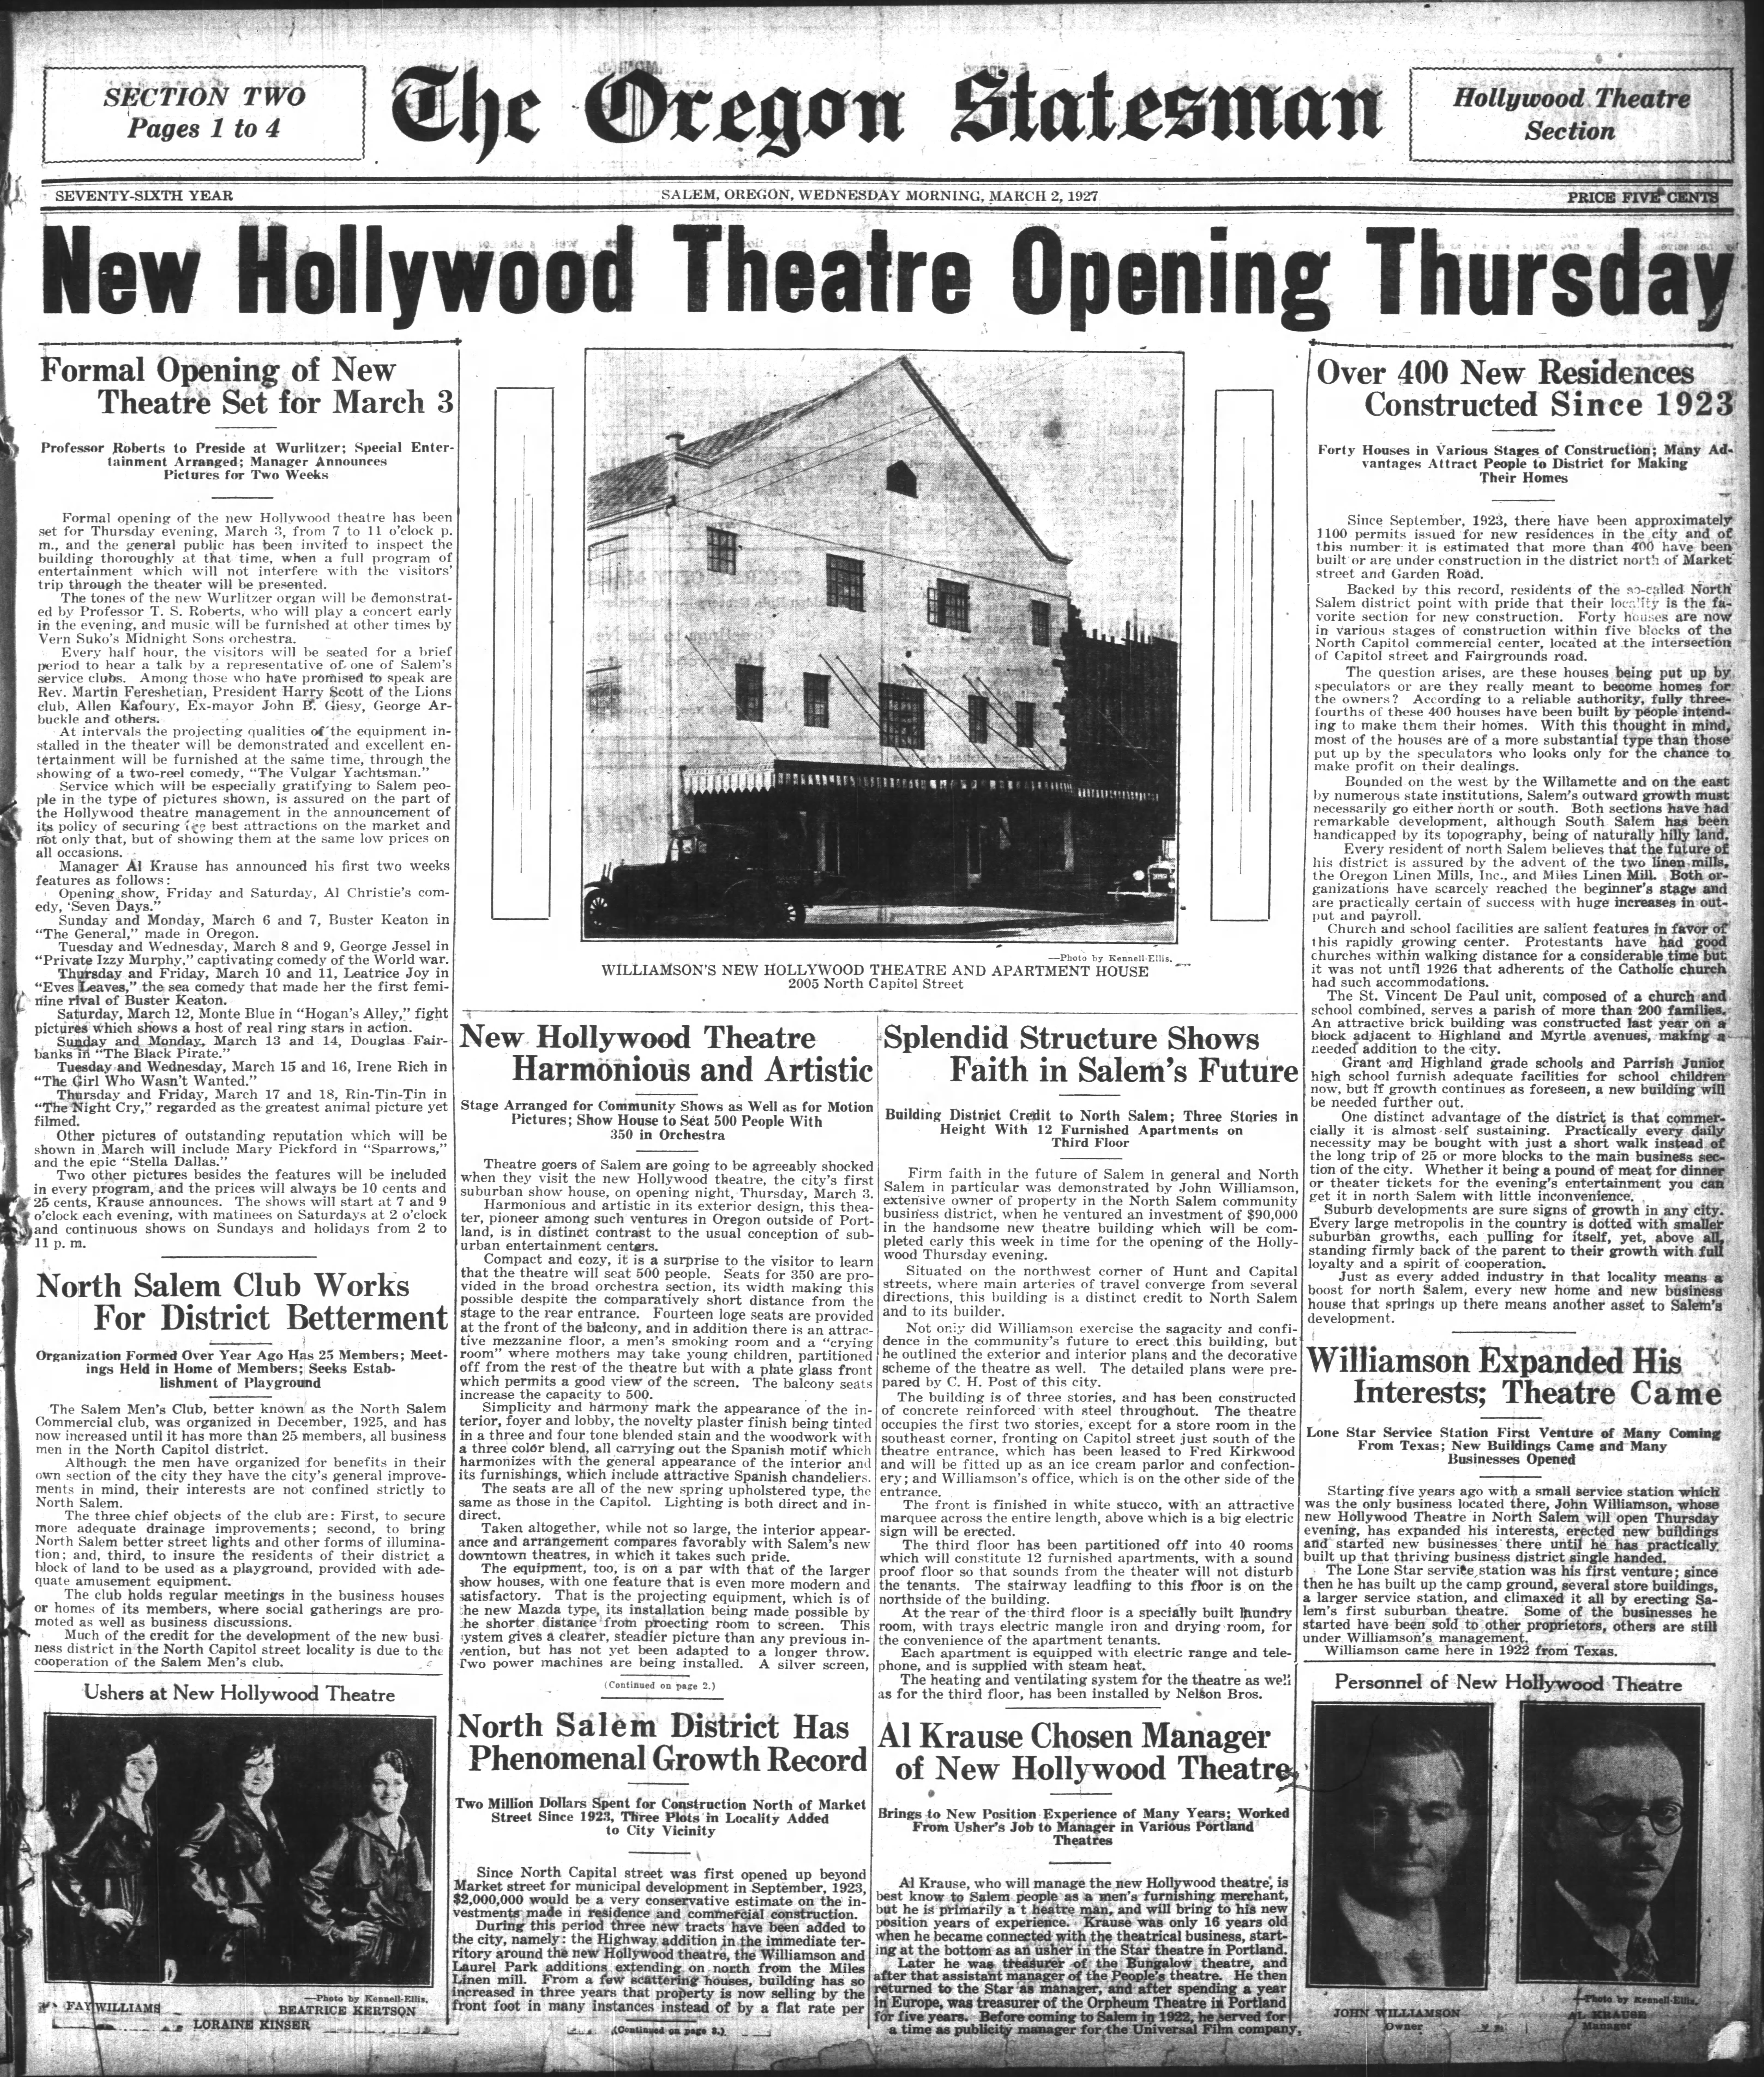 Hollywood theater opens, 1927